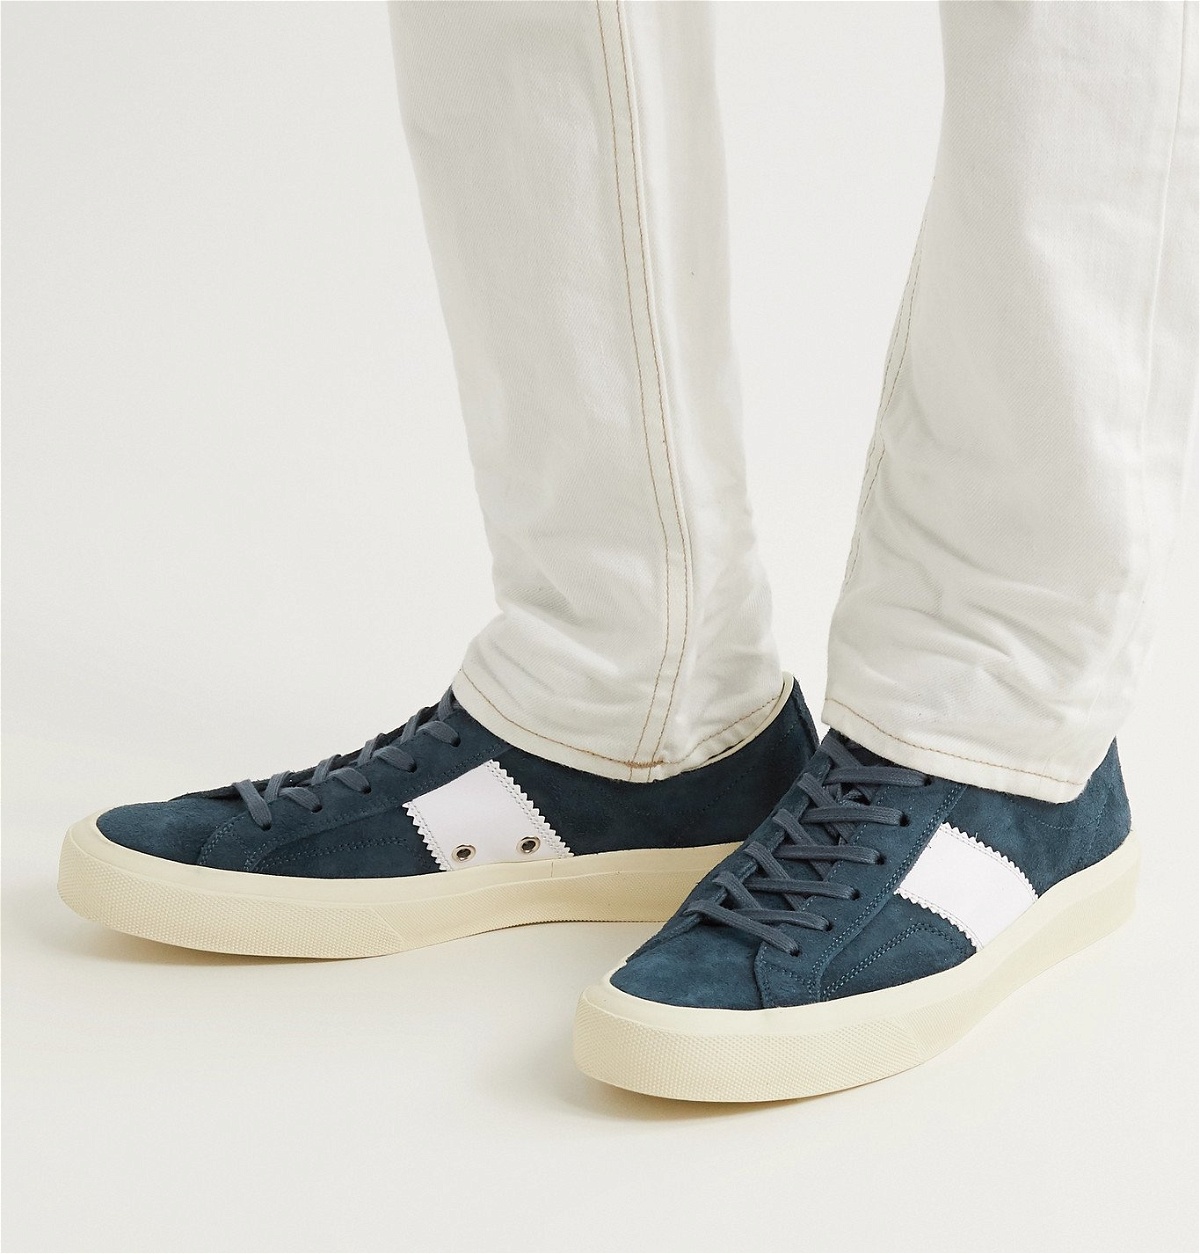 TOM FORD - Cambridge Leather-Trimmed Suede Sneakers - Blue TOM FORD